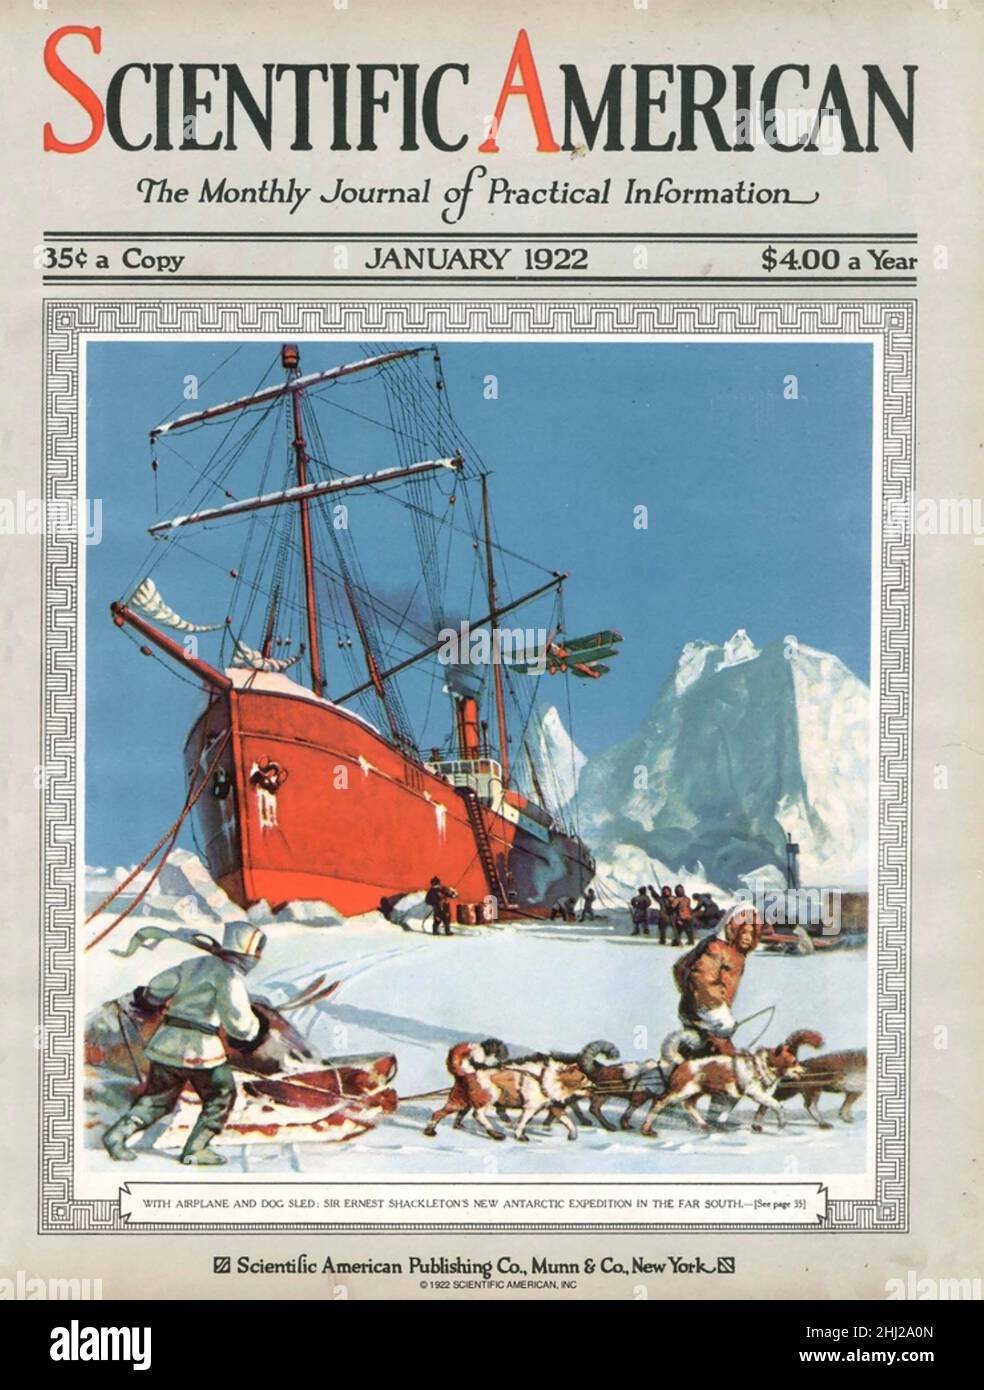 ERNEST SHACKLETON (1874-1922) Anglo-Irish Antarctic explorer. His ship The Endurance on the January 1922 cover of Scientific American magazine. Stock Photo